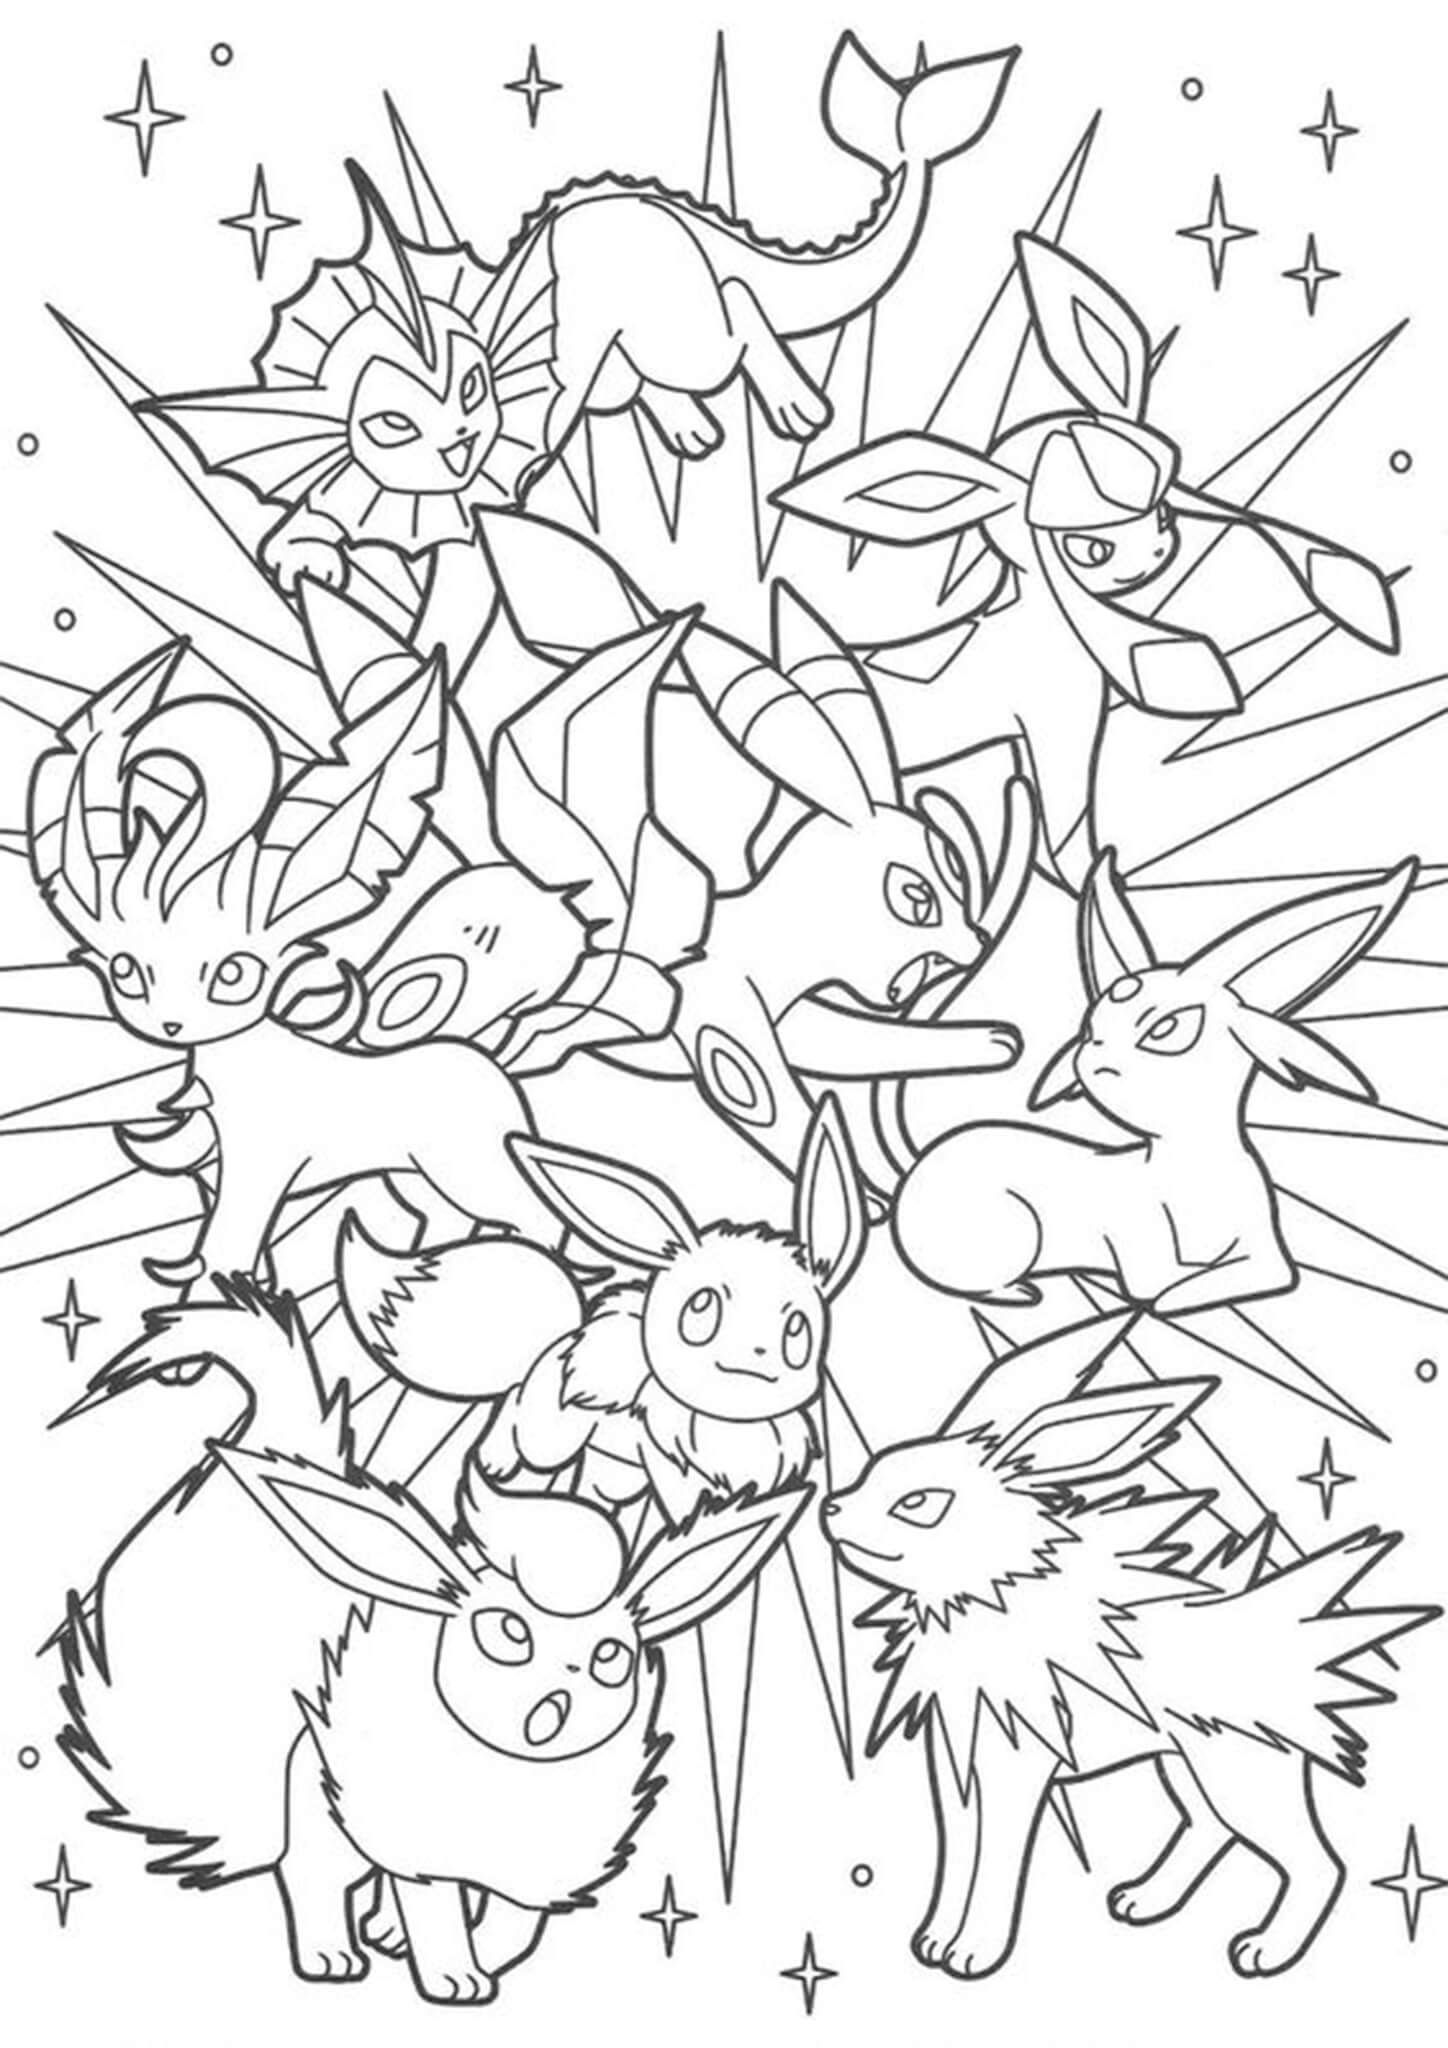 Free & Easy To Print Eevee Coloring Pages | Pokemon coloring pages, Pikachu coloring  page, Pokemon coloring